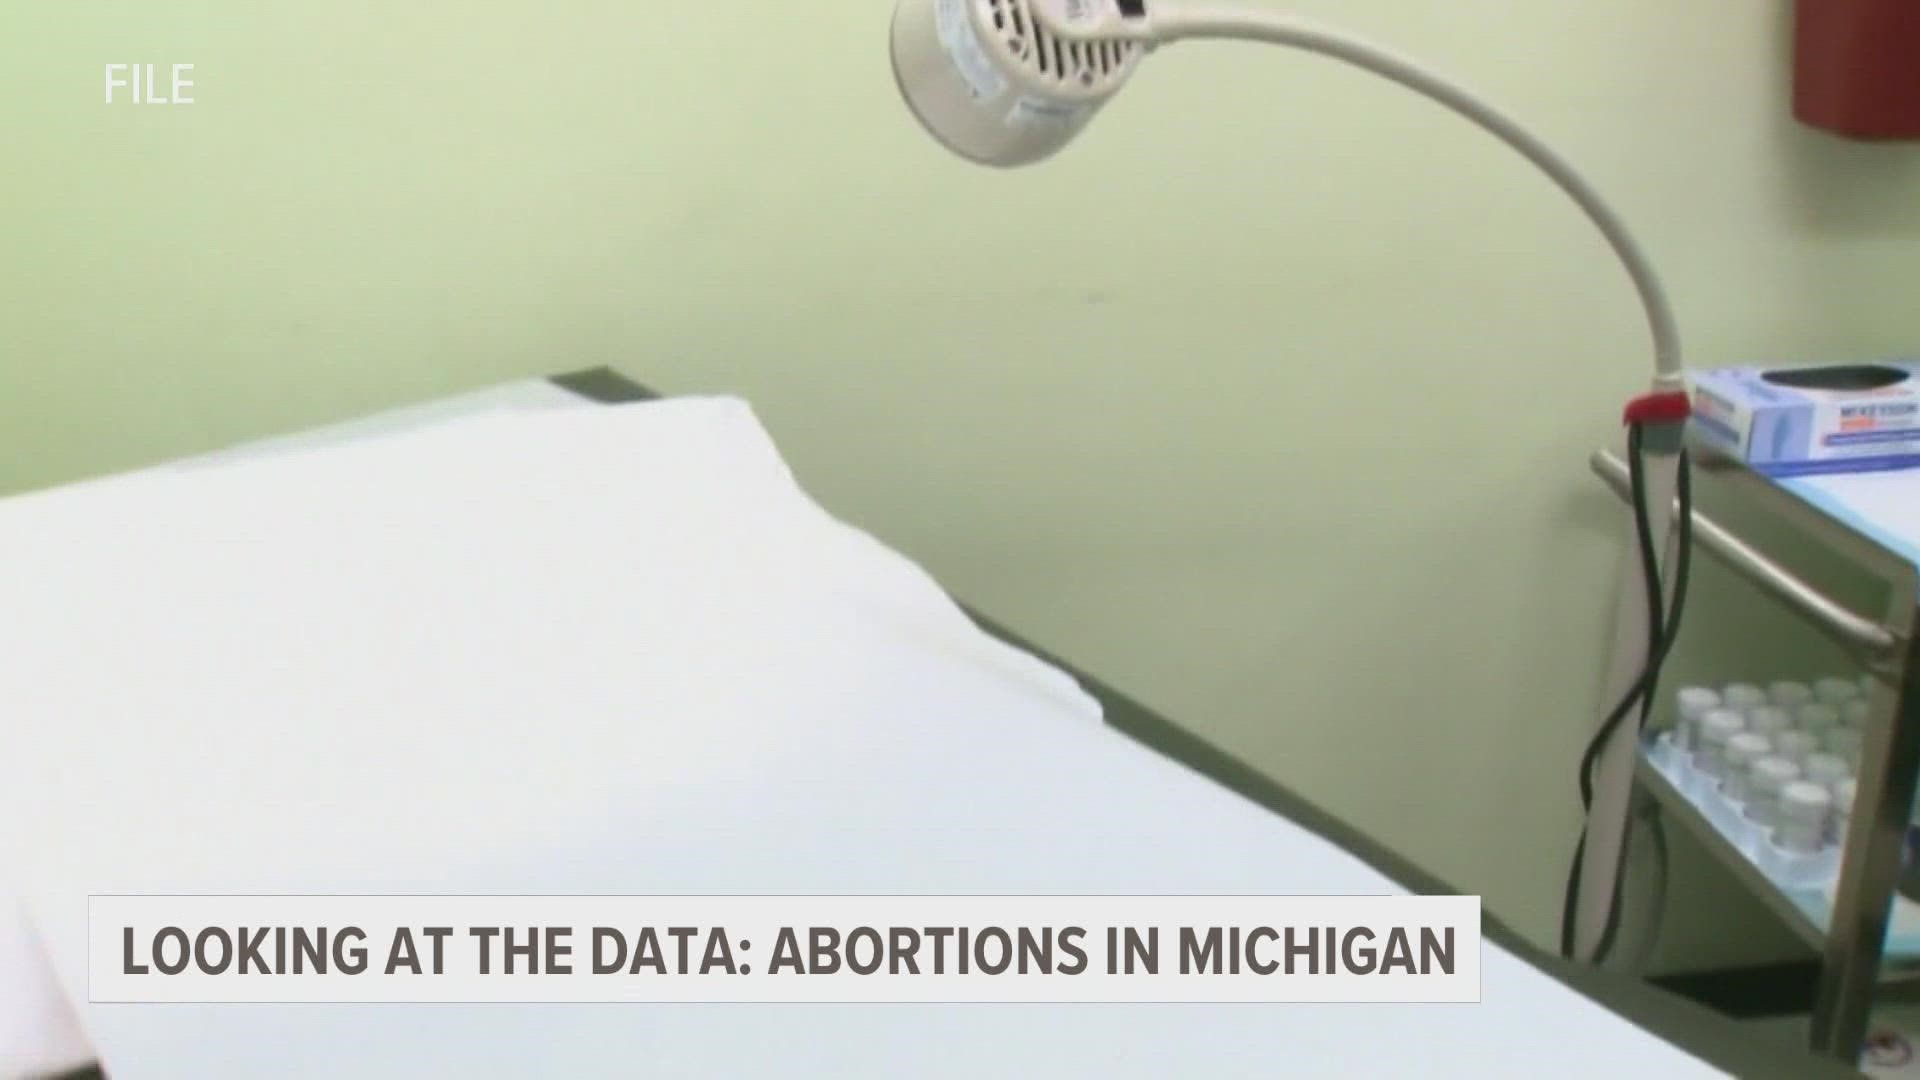 The latest CDC data from 2019 shows Michigan ranks 8th in the nation when it comes to the number of abortions.